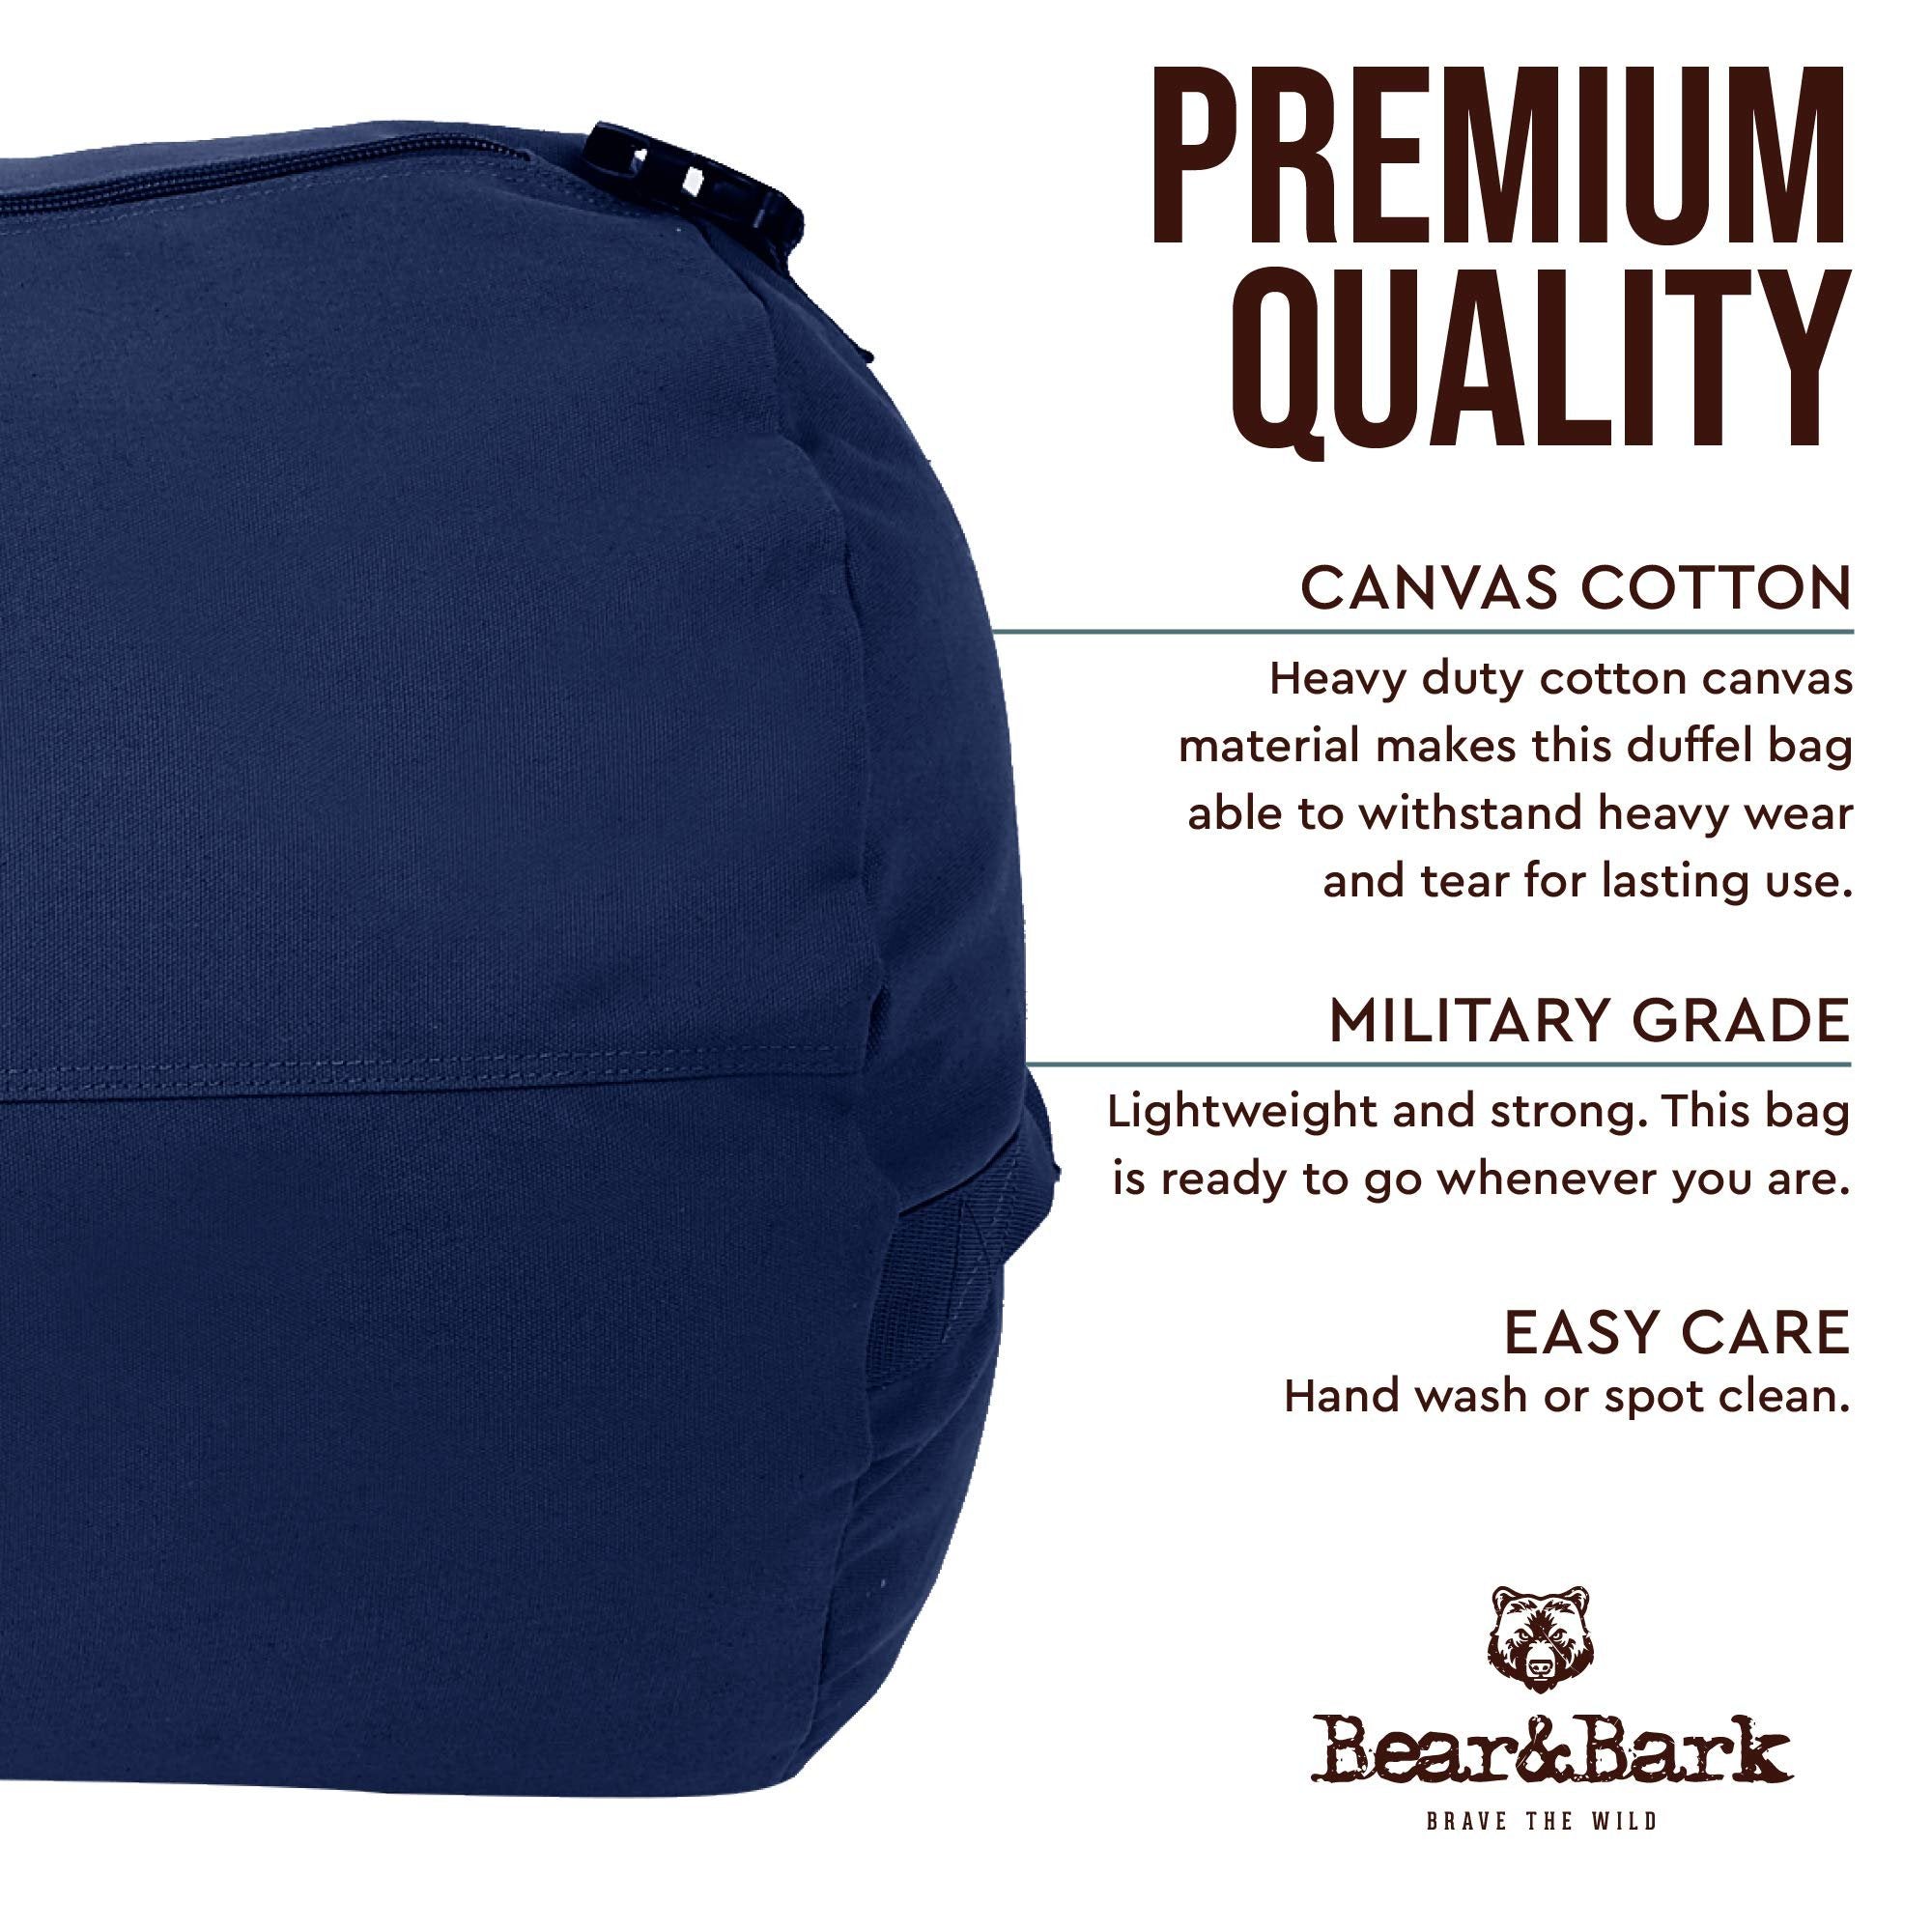 Extra Large Duffle Bag - Blue 46"x20" - 236.8L - Canvas Military and Army Cargo Style Duffel Tote for Men and Women - College Student, Dorm, Backpacking, X-Large Travel and Storage Shoulder Bag